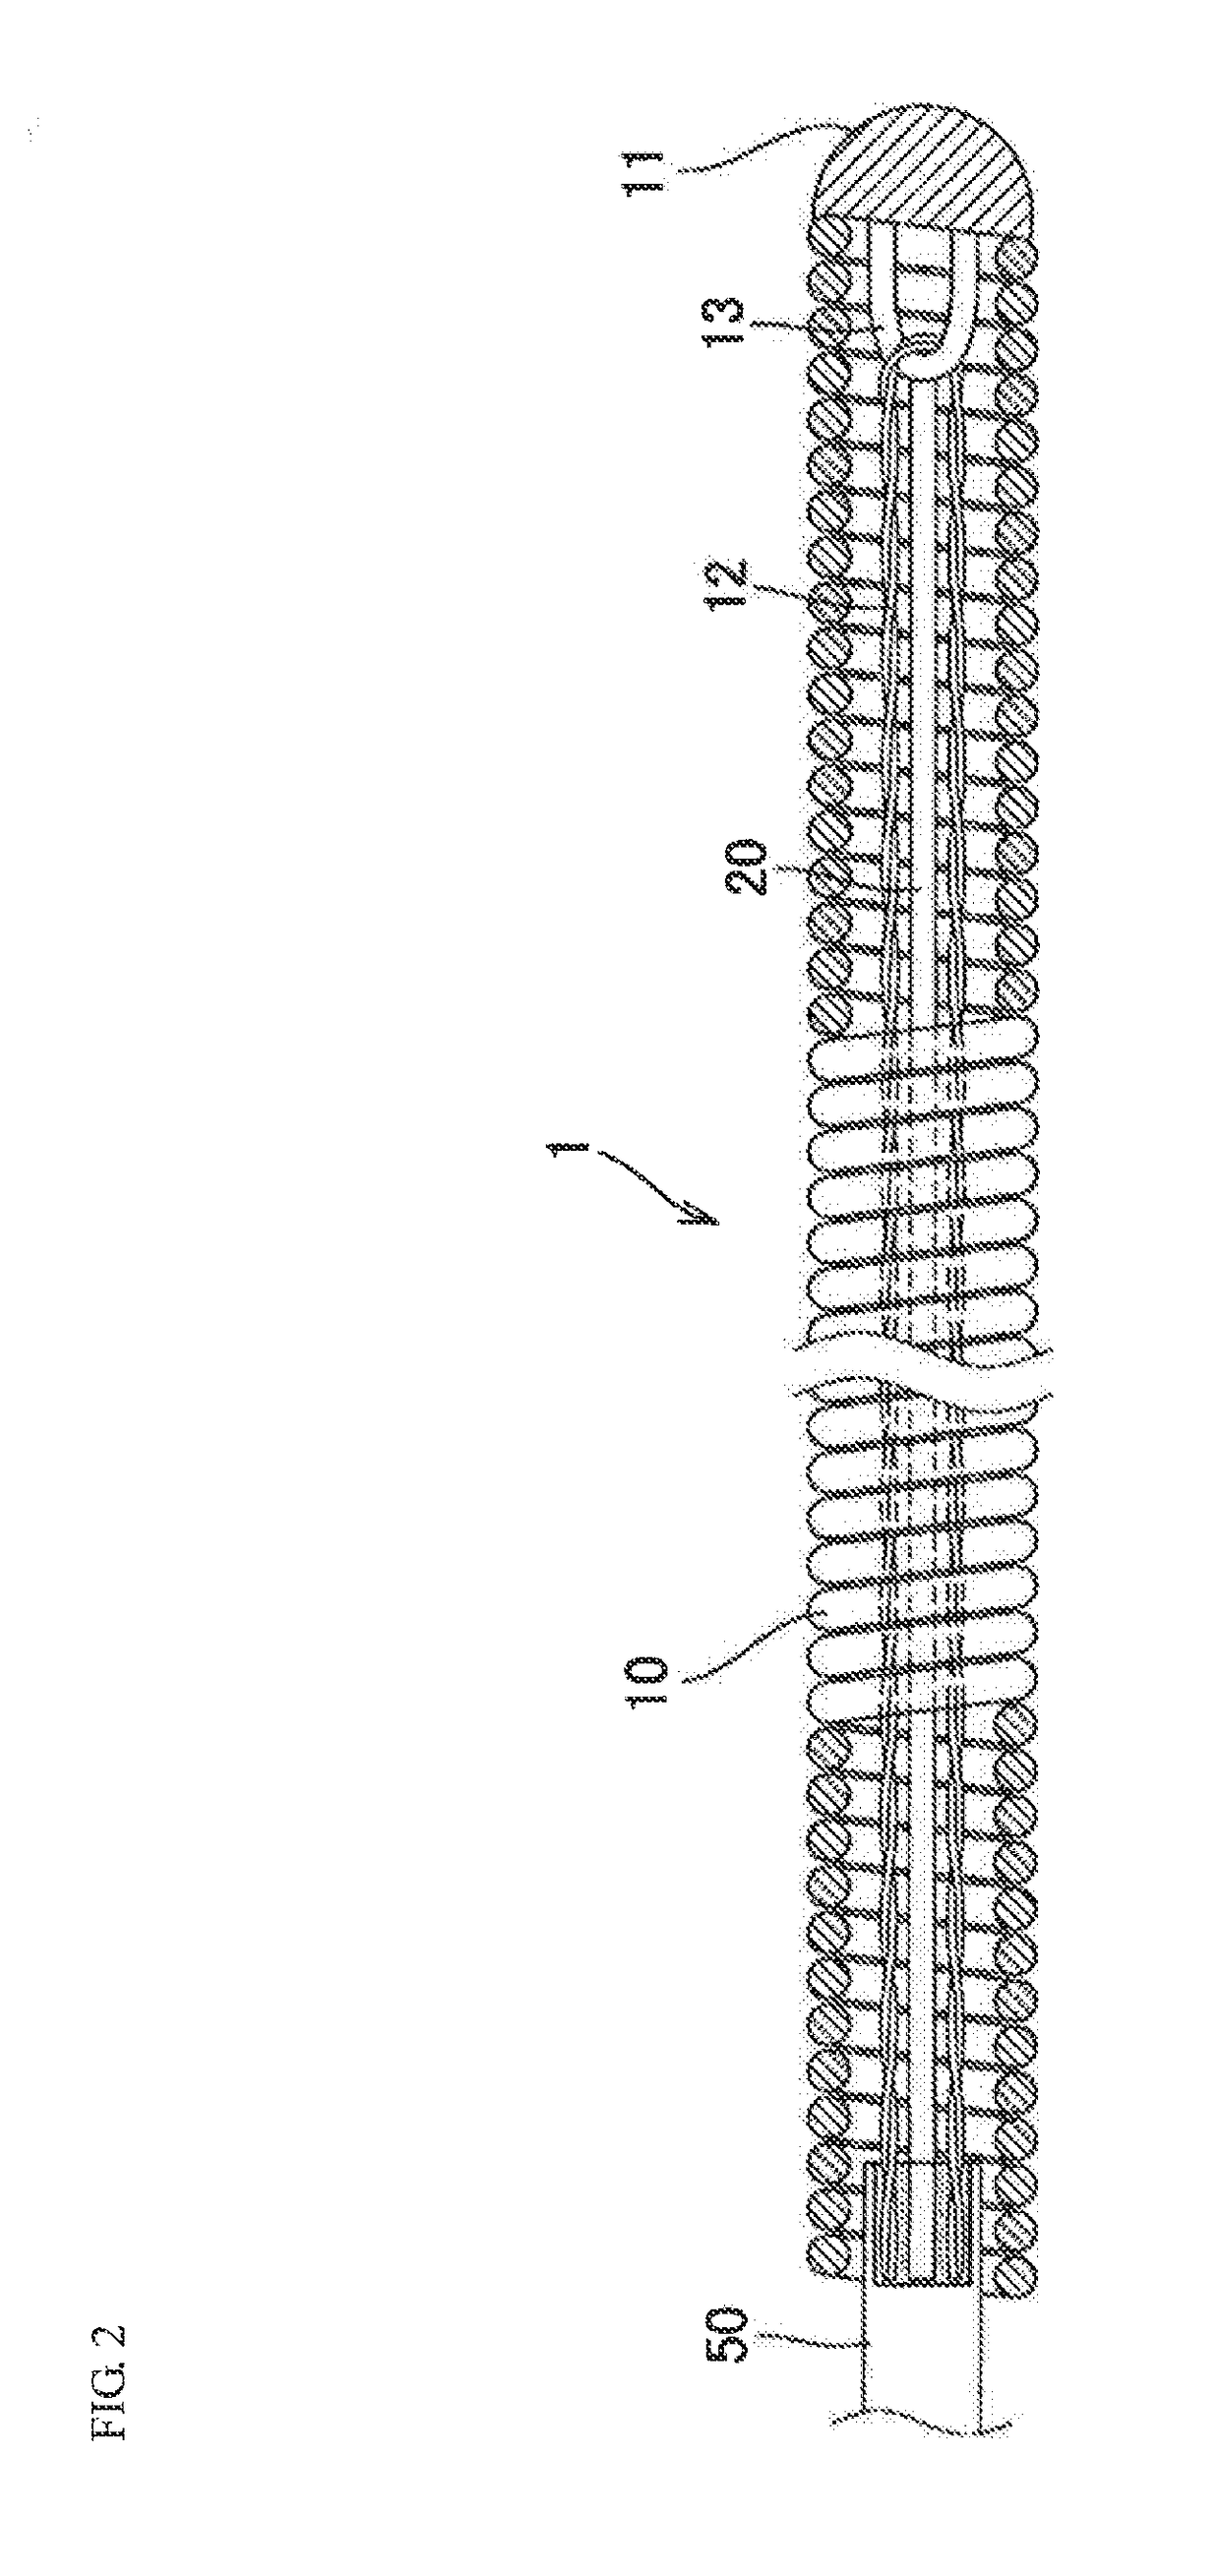 Vascular embolization device and production method therefor